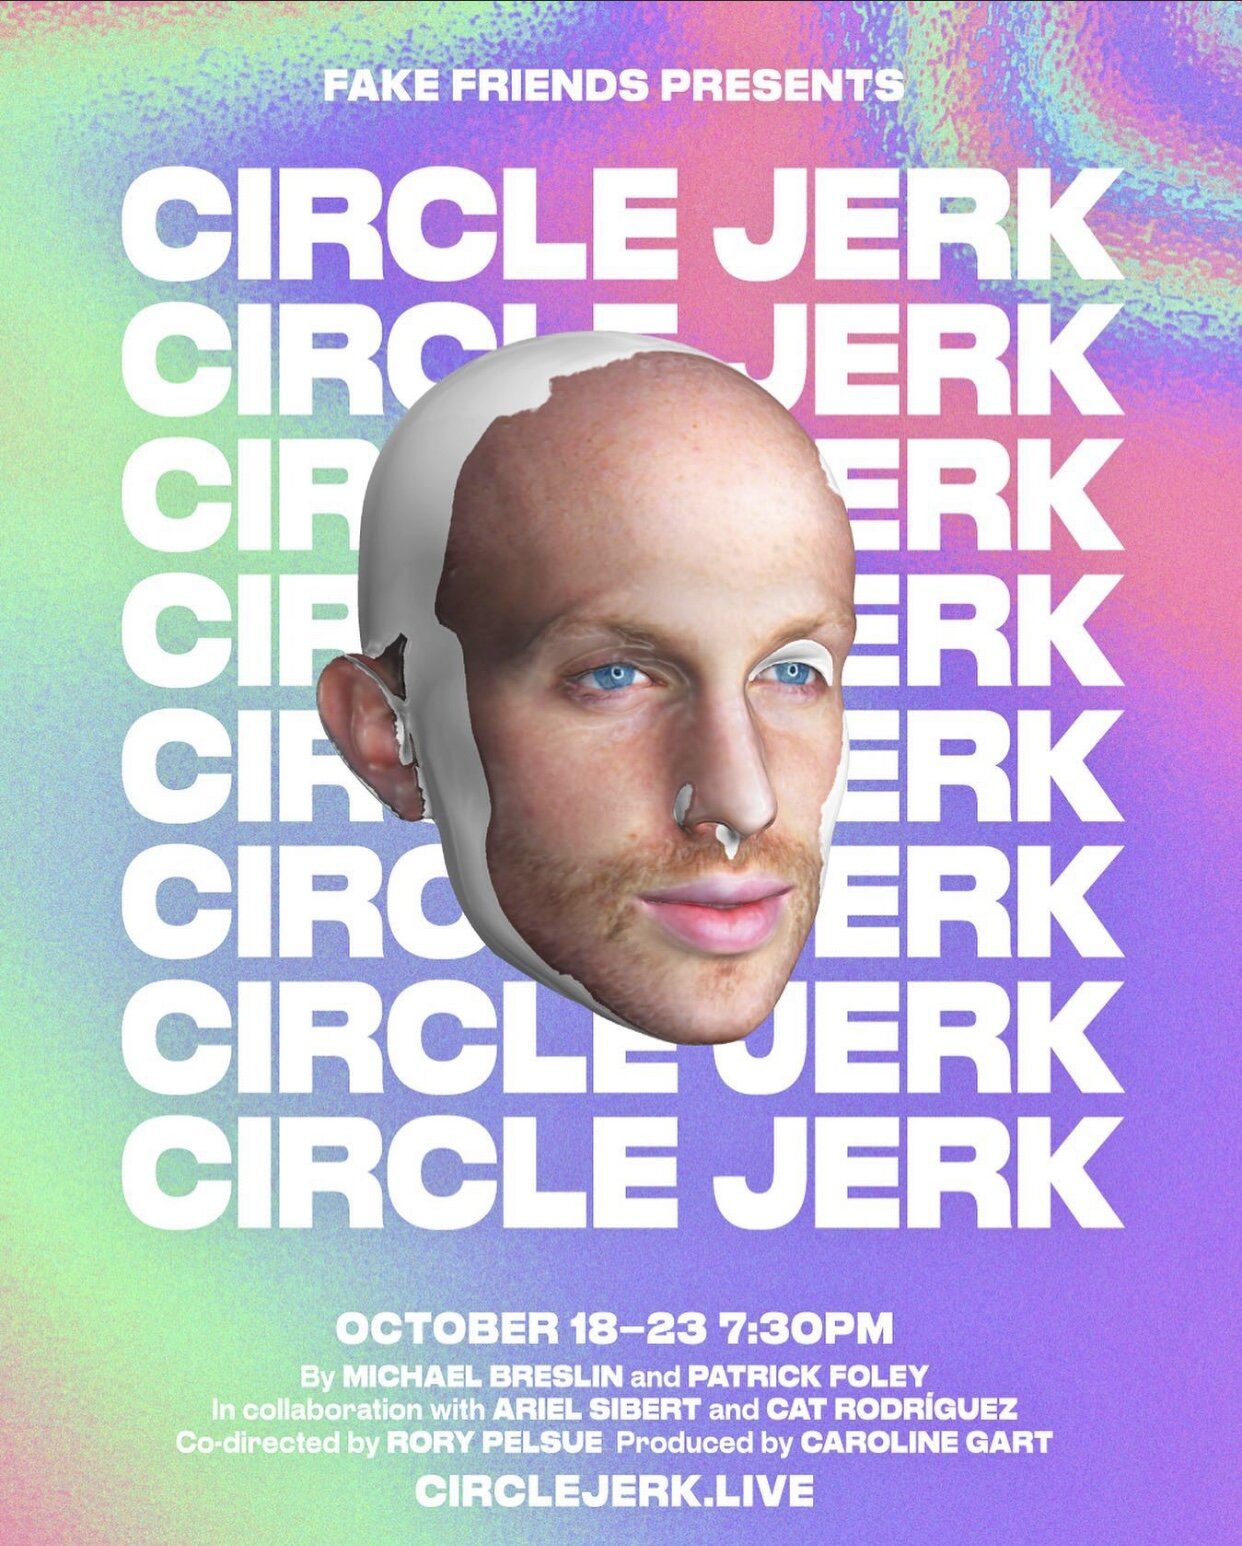 alvin cruz recommends circle jerk with friends pic